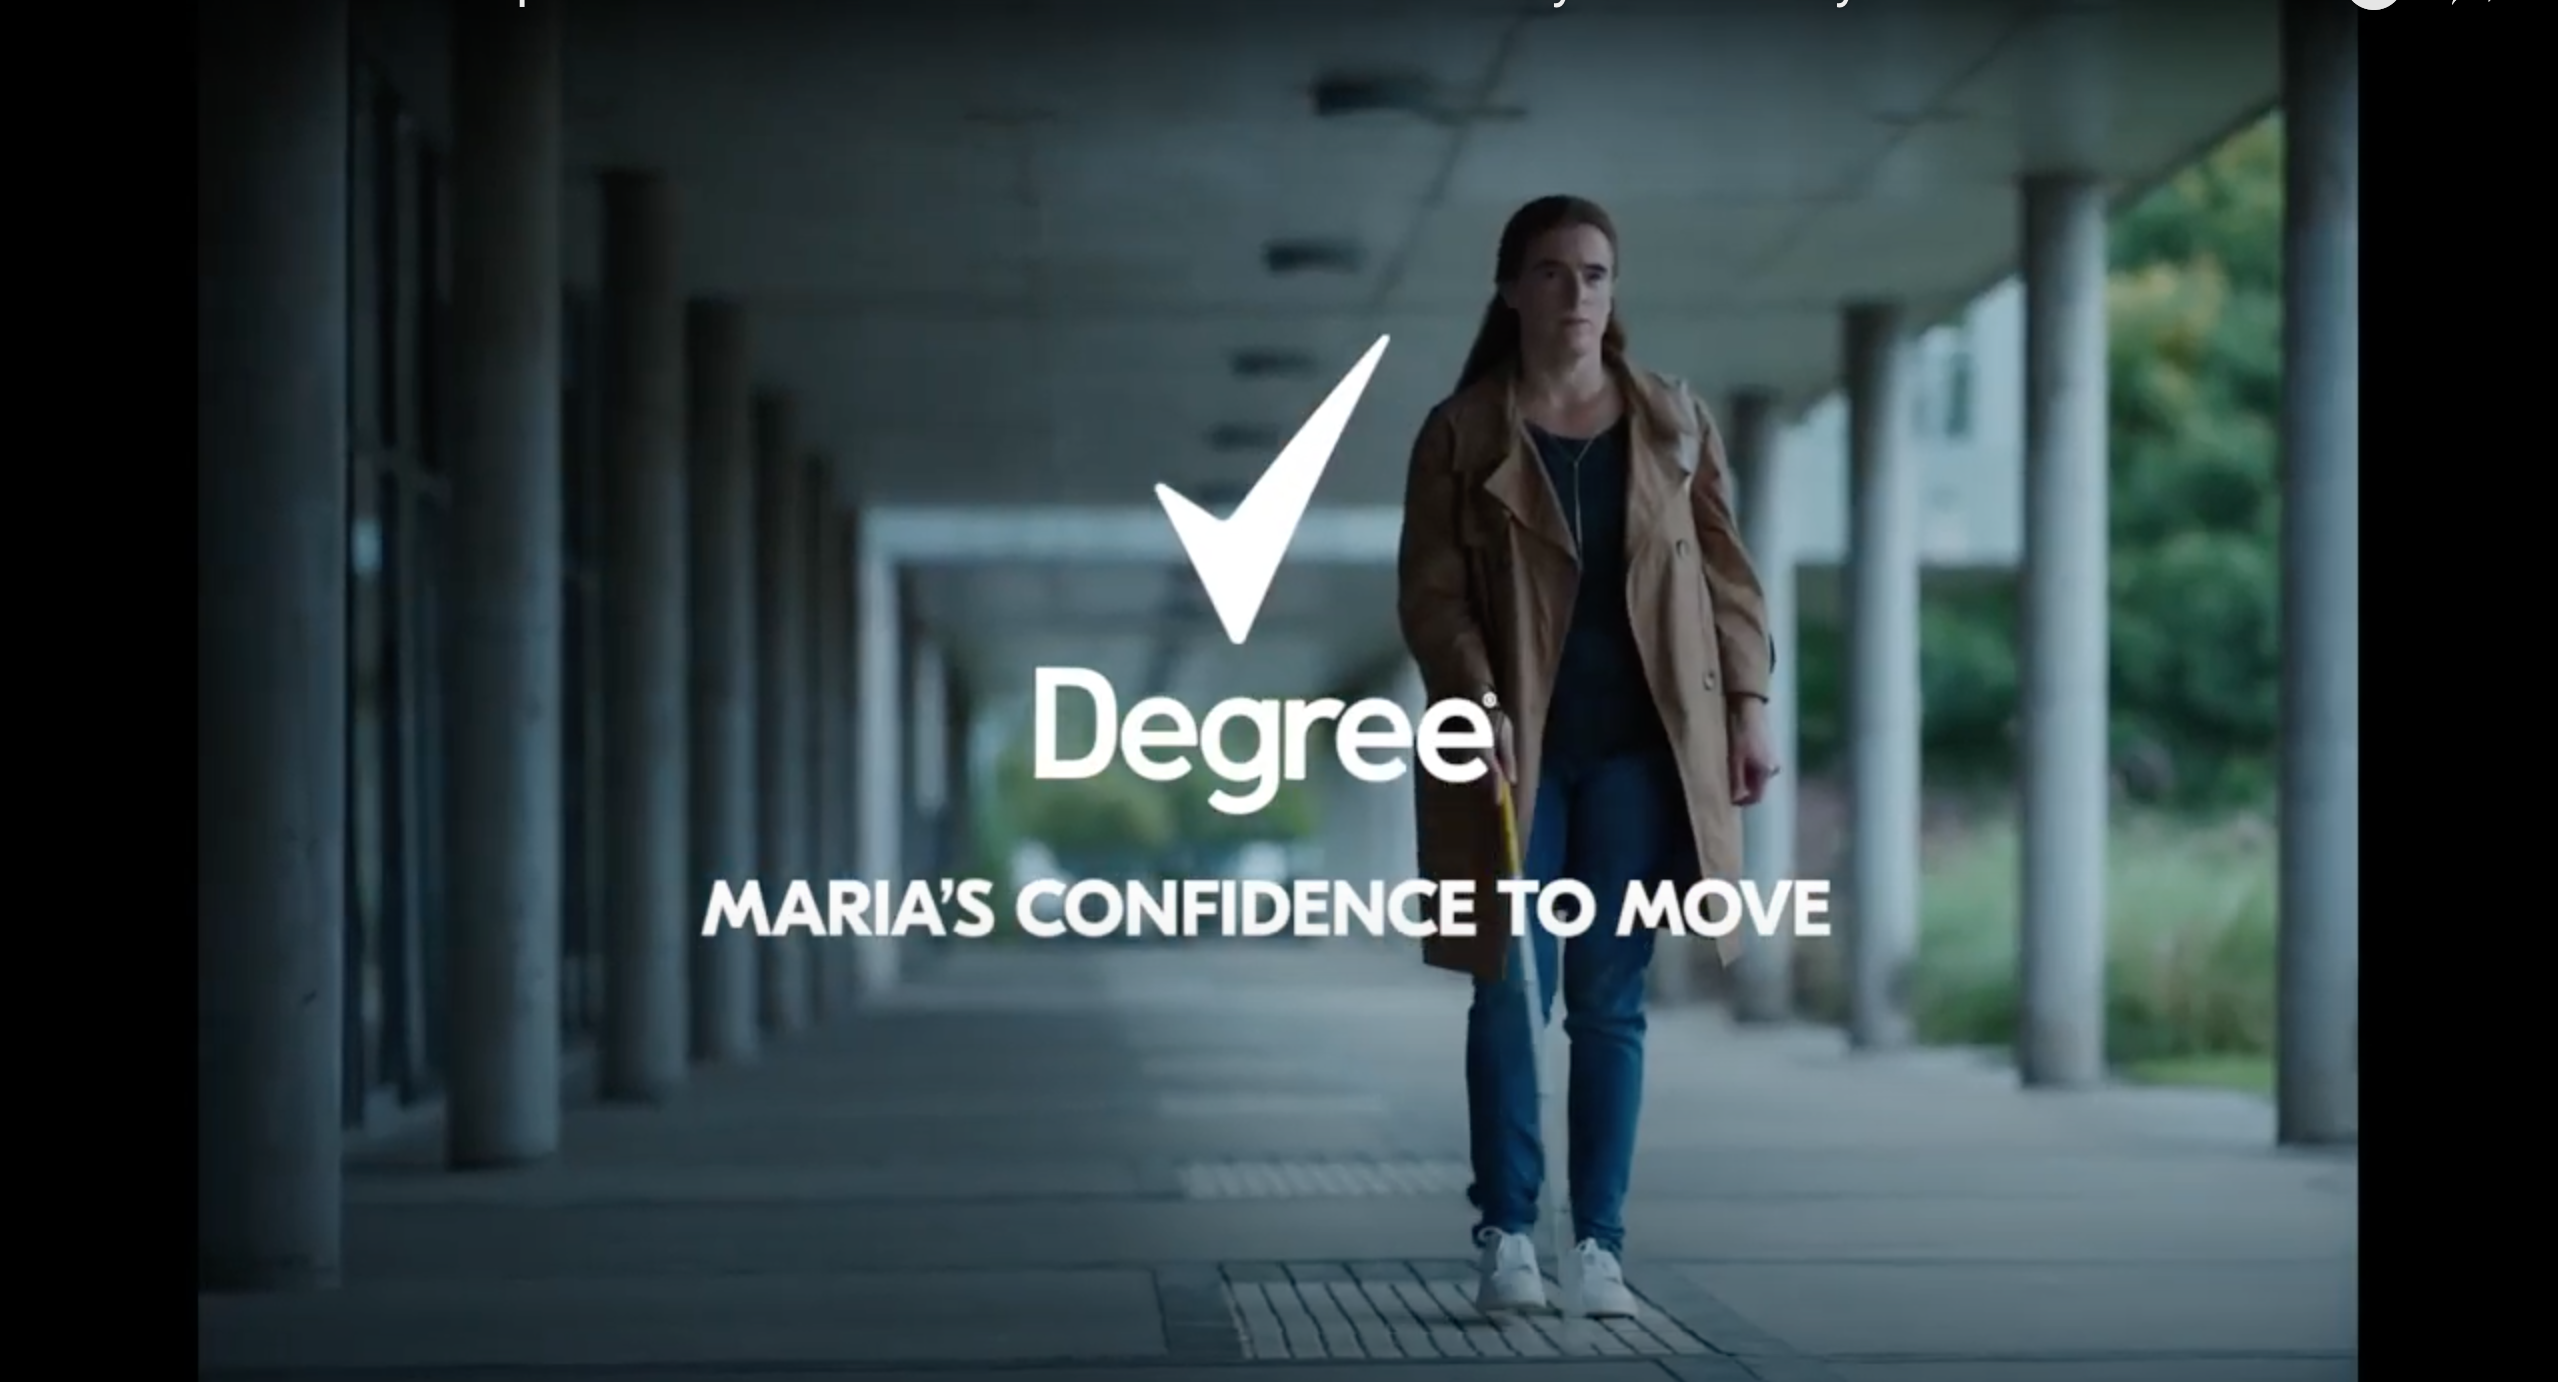 Maria, a white woman using a white cane in a trench coat text on the screen says Degree Maria's Confidence to Move